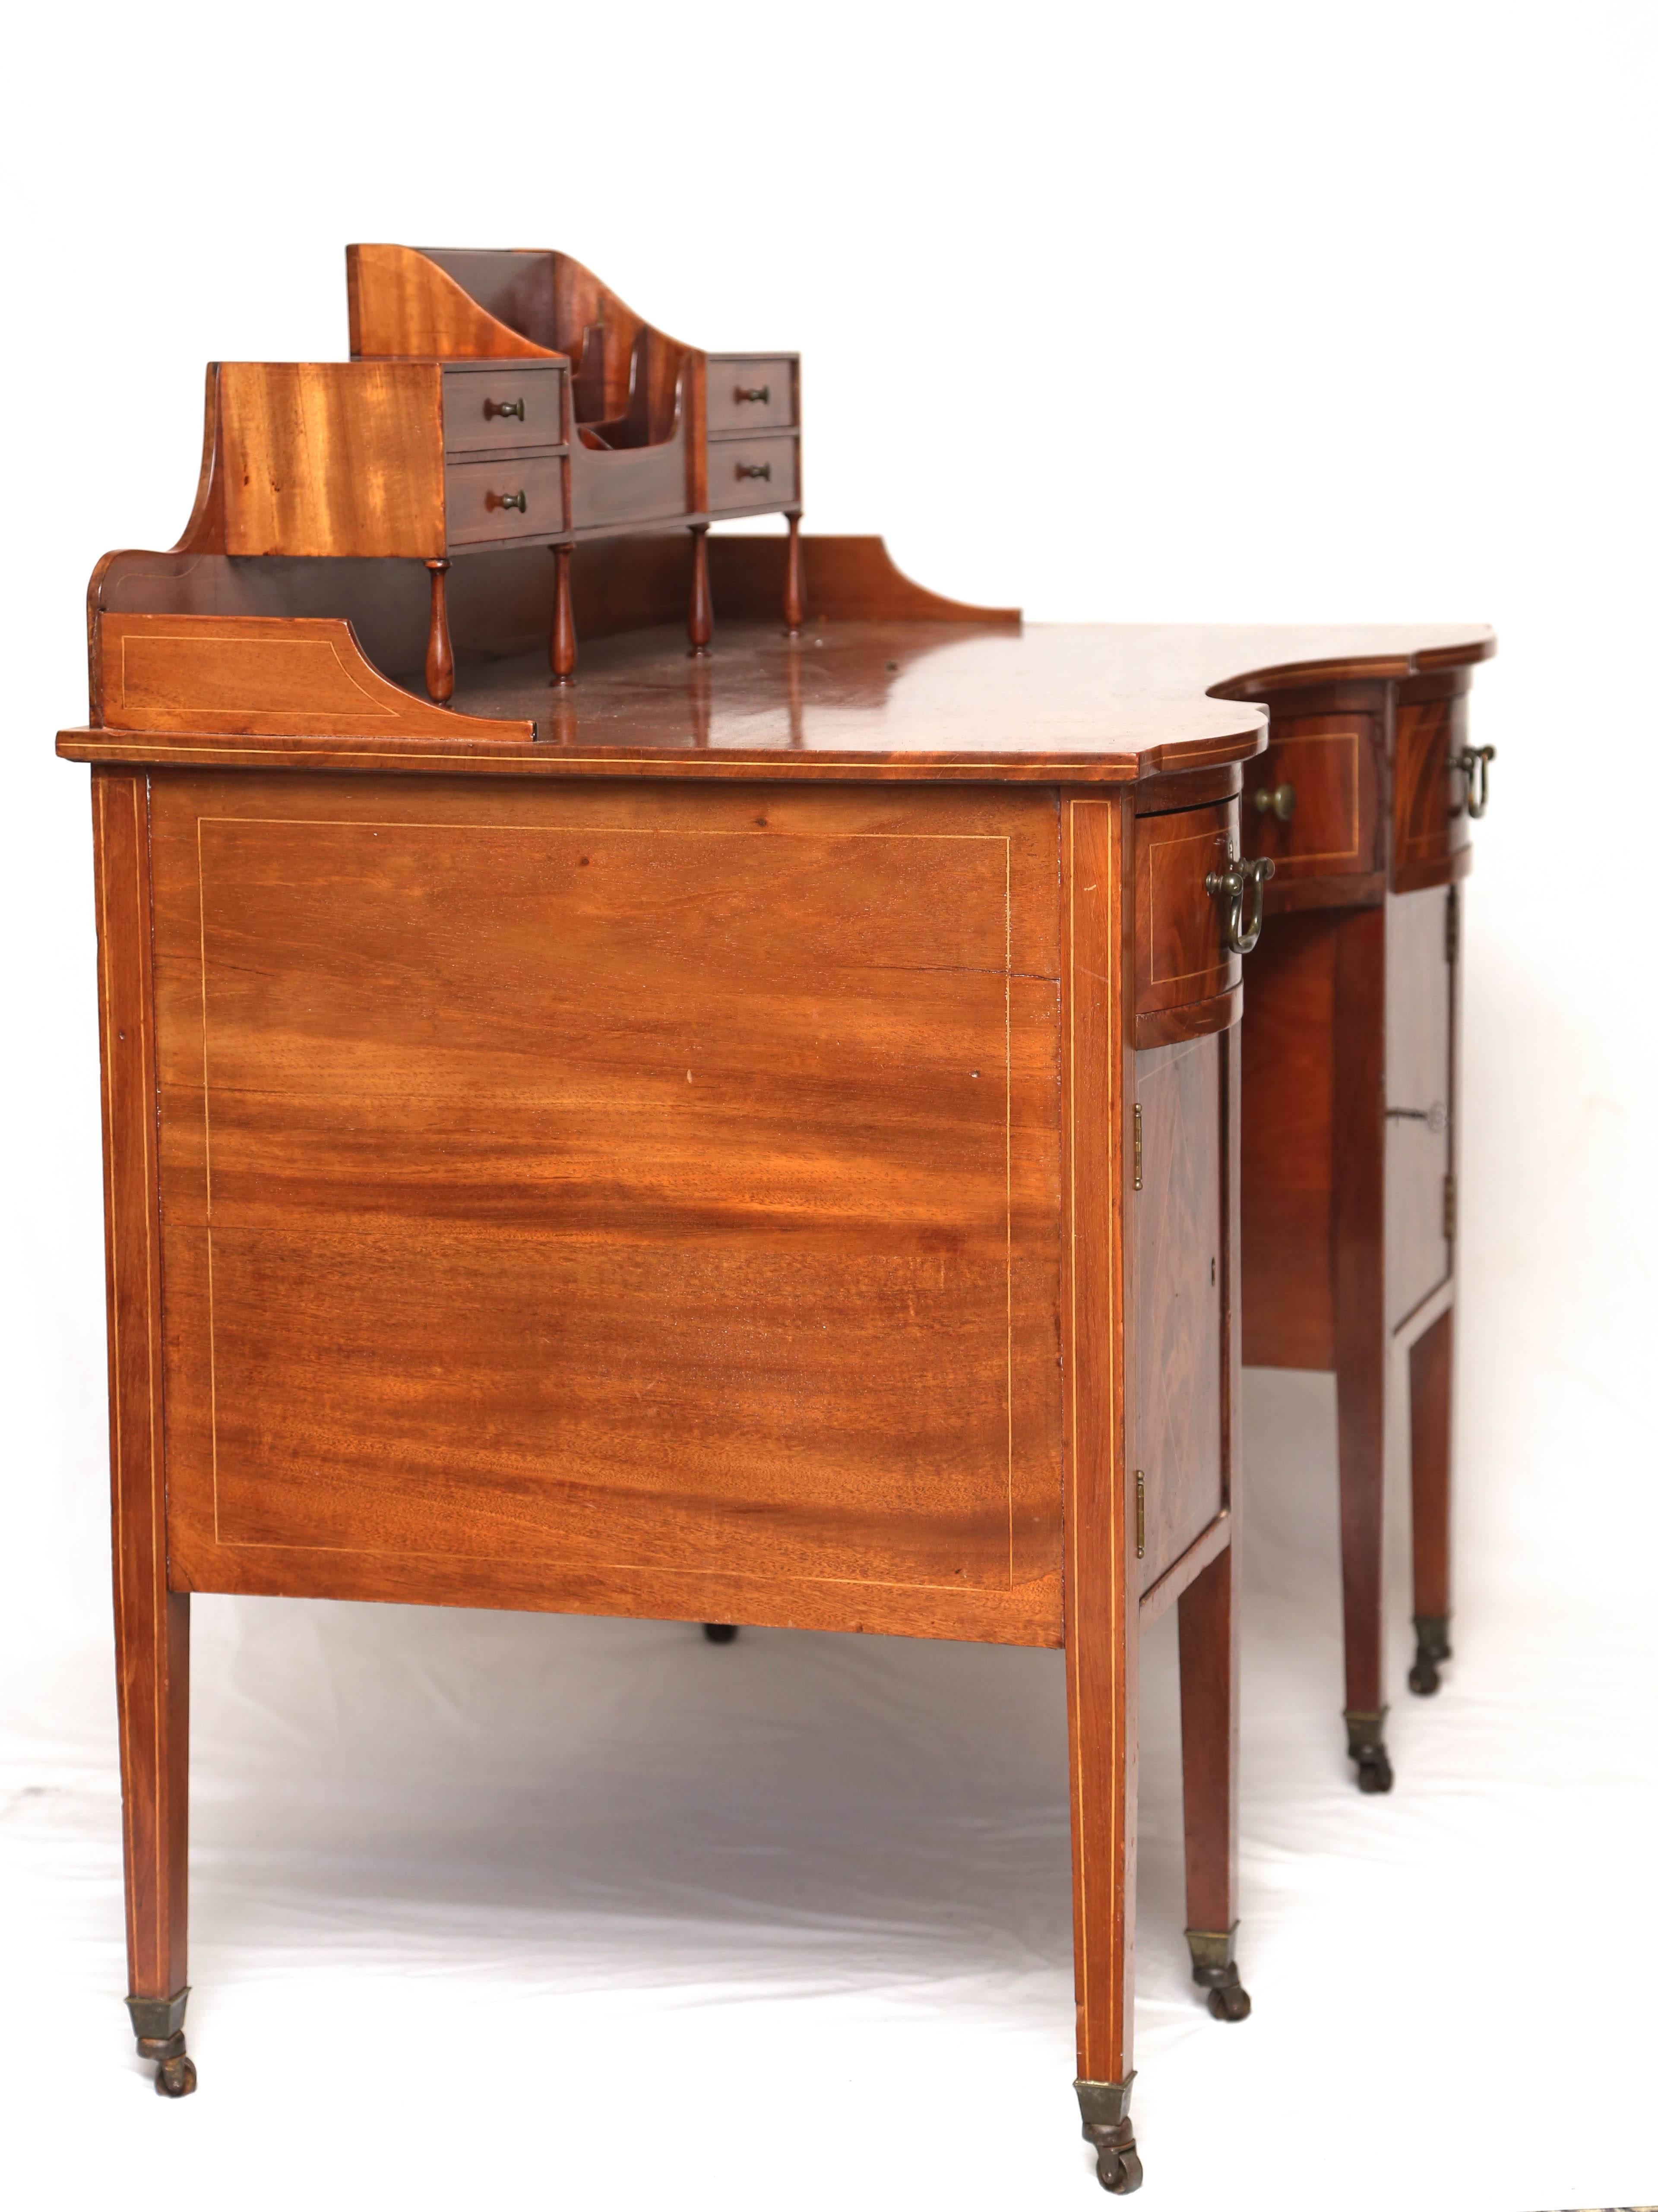 Superb Mahogany American Writing Desk with Leather Holder and Drawers 1